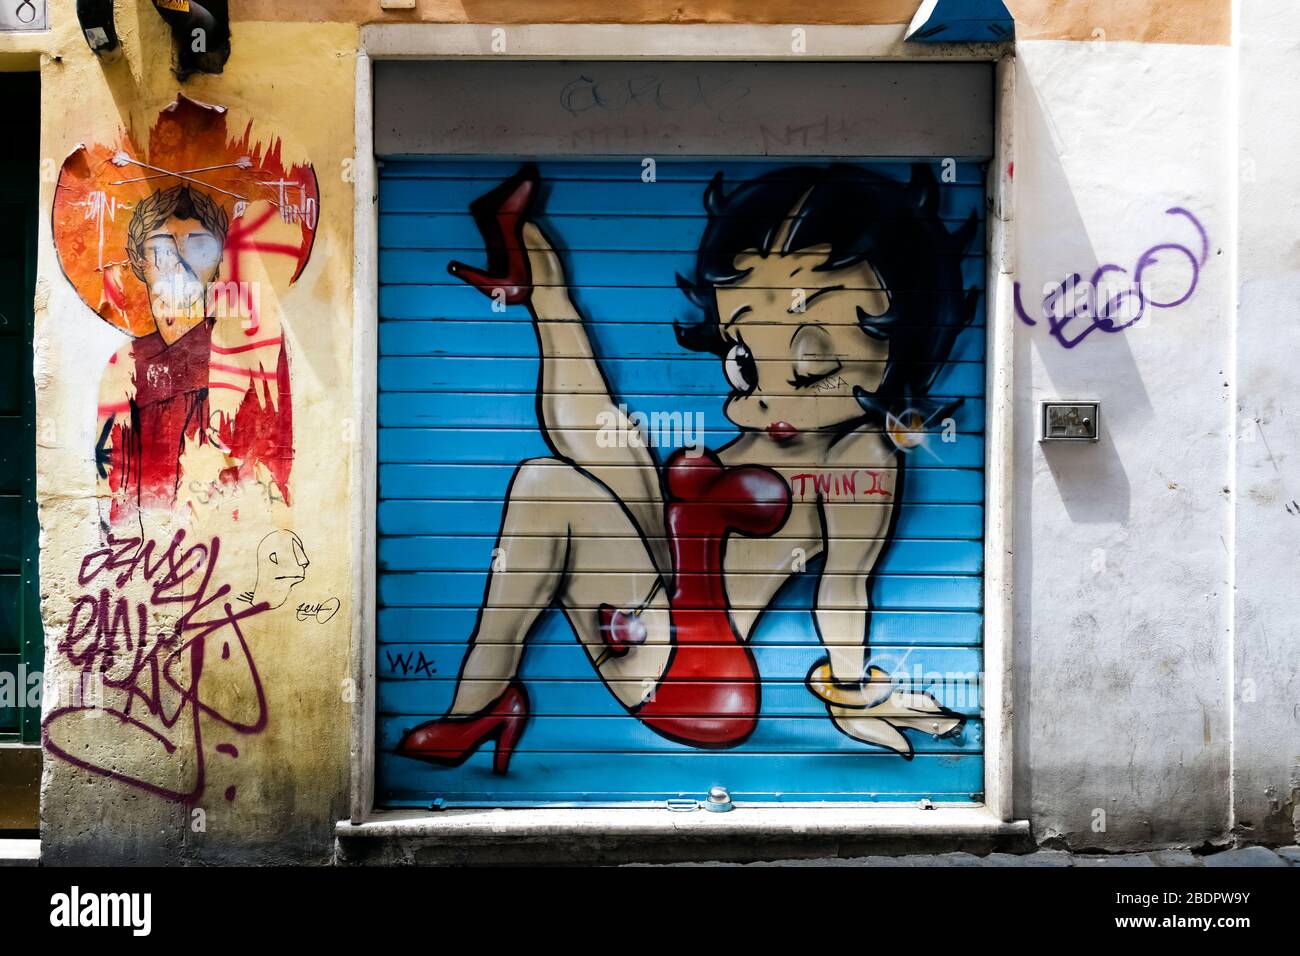 Betty Boop painted on a blue background of a closed rolling shutter. Shop front door, store. Rome, Italy, Europe, EU Stock Photo